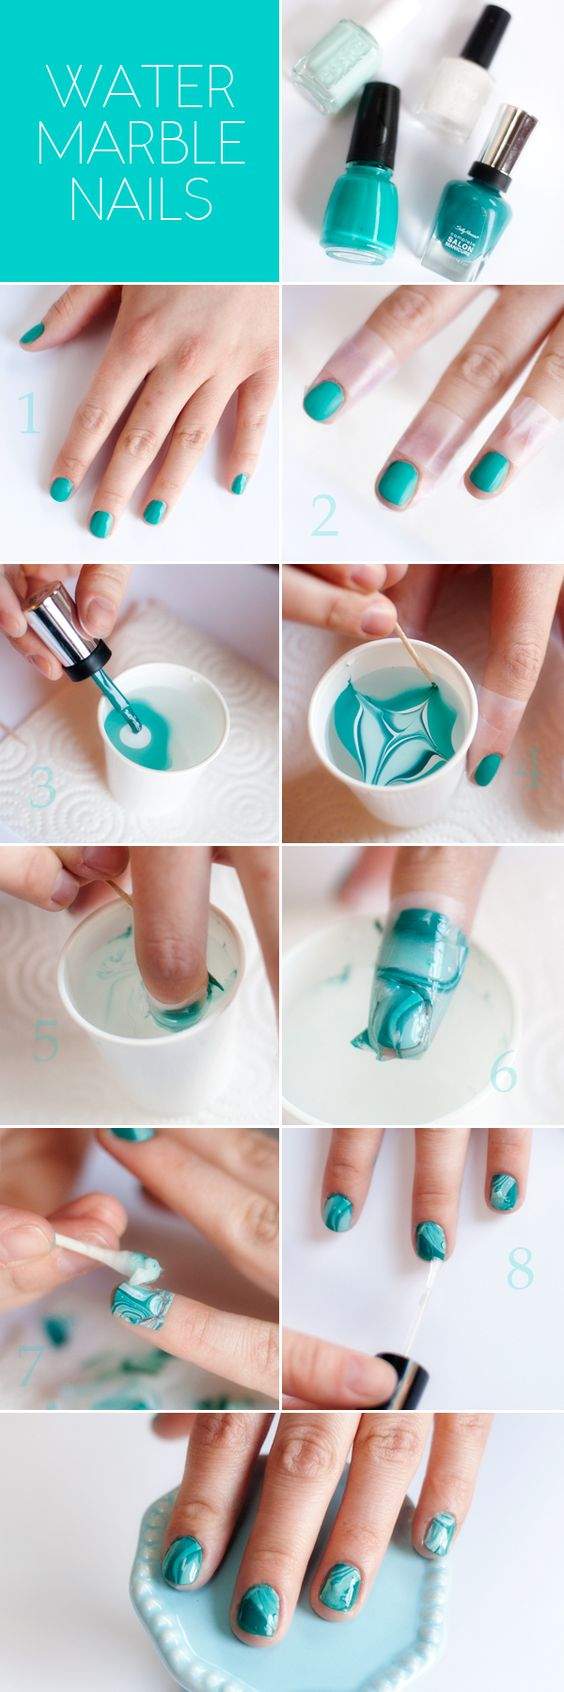 How to do marble nails at home with water